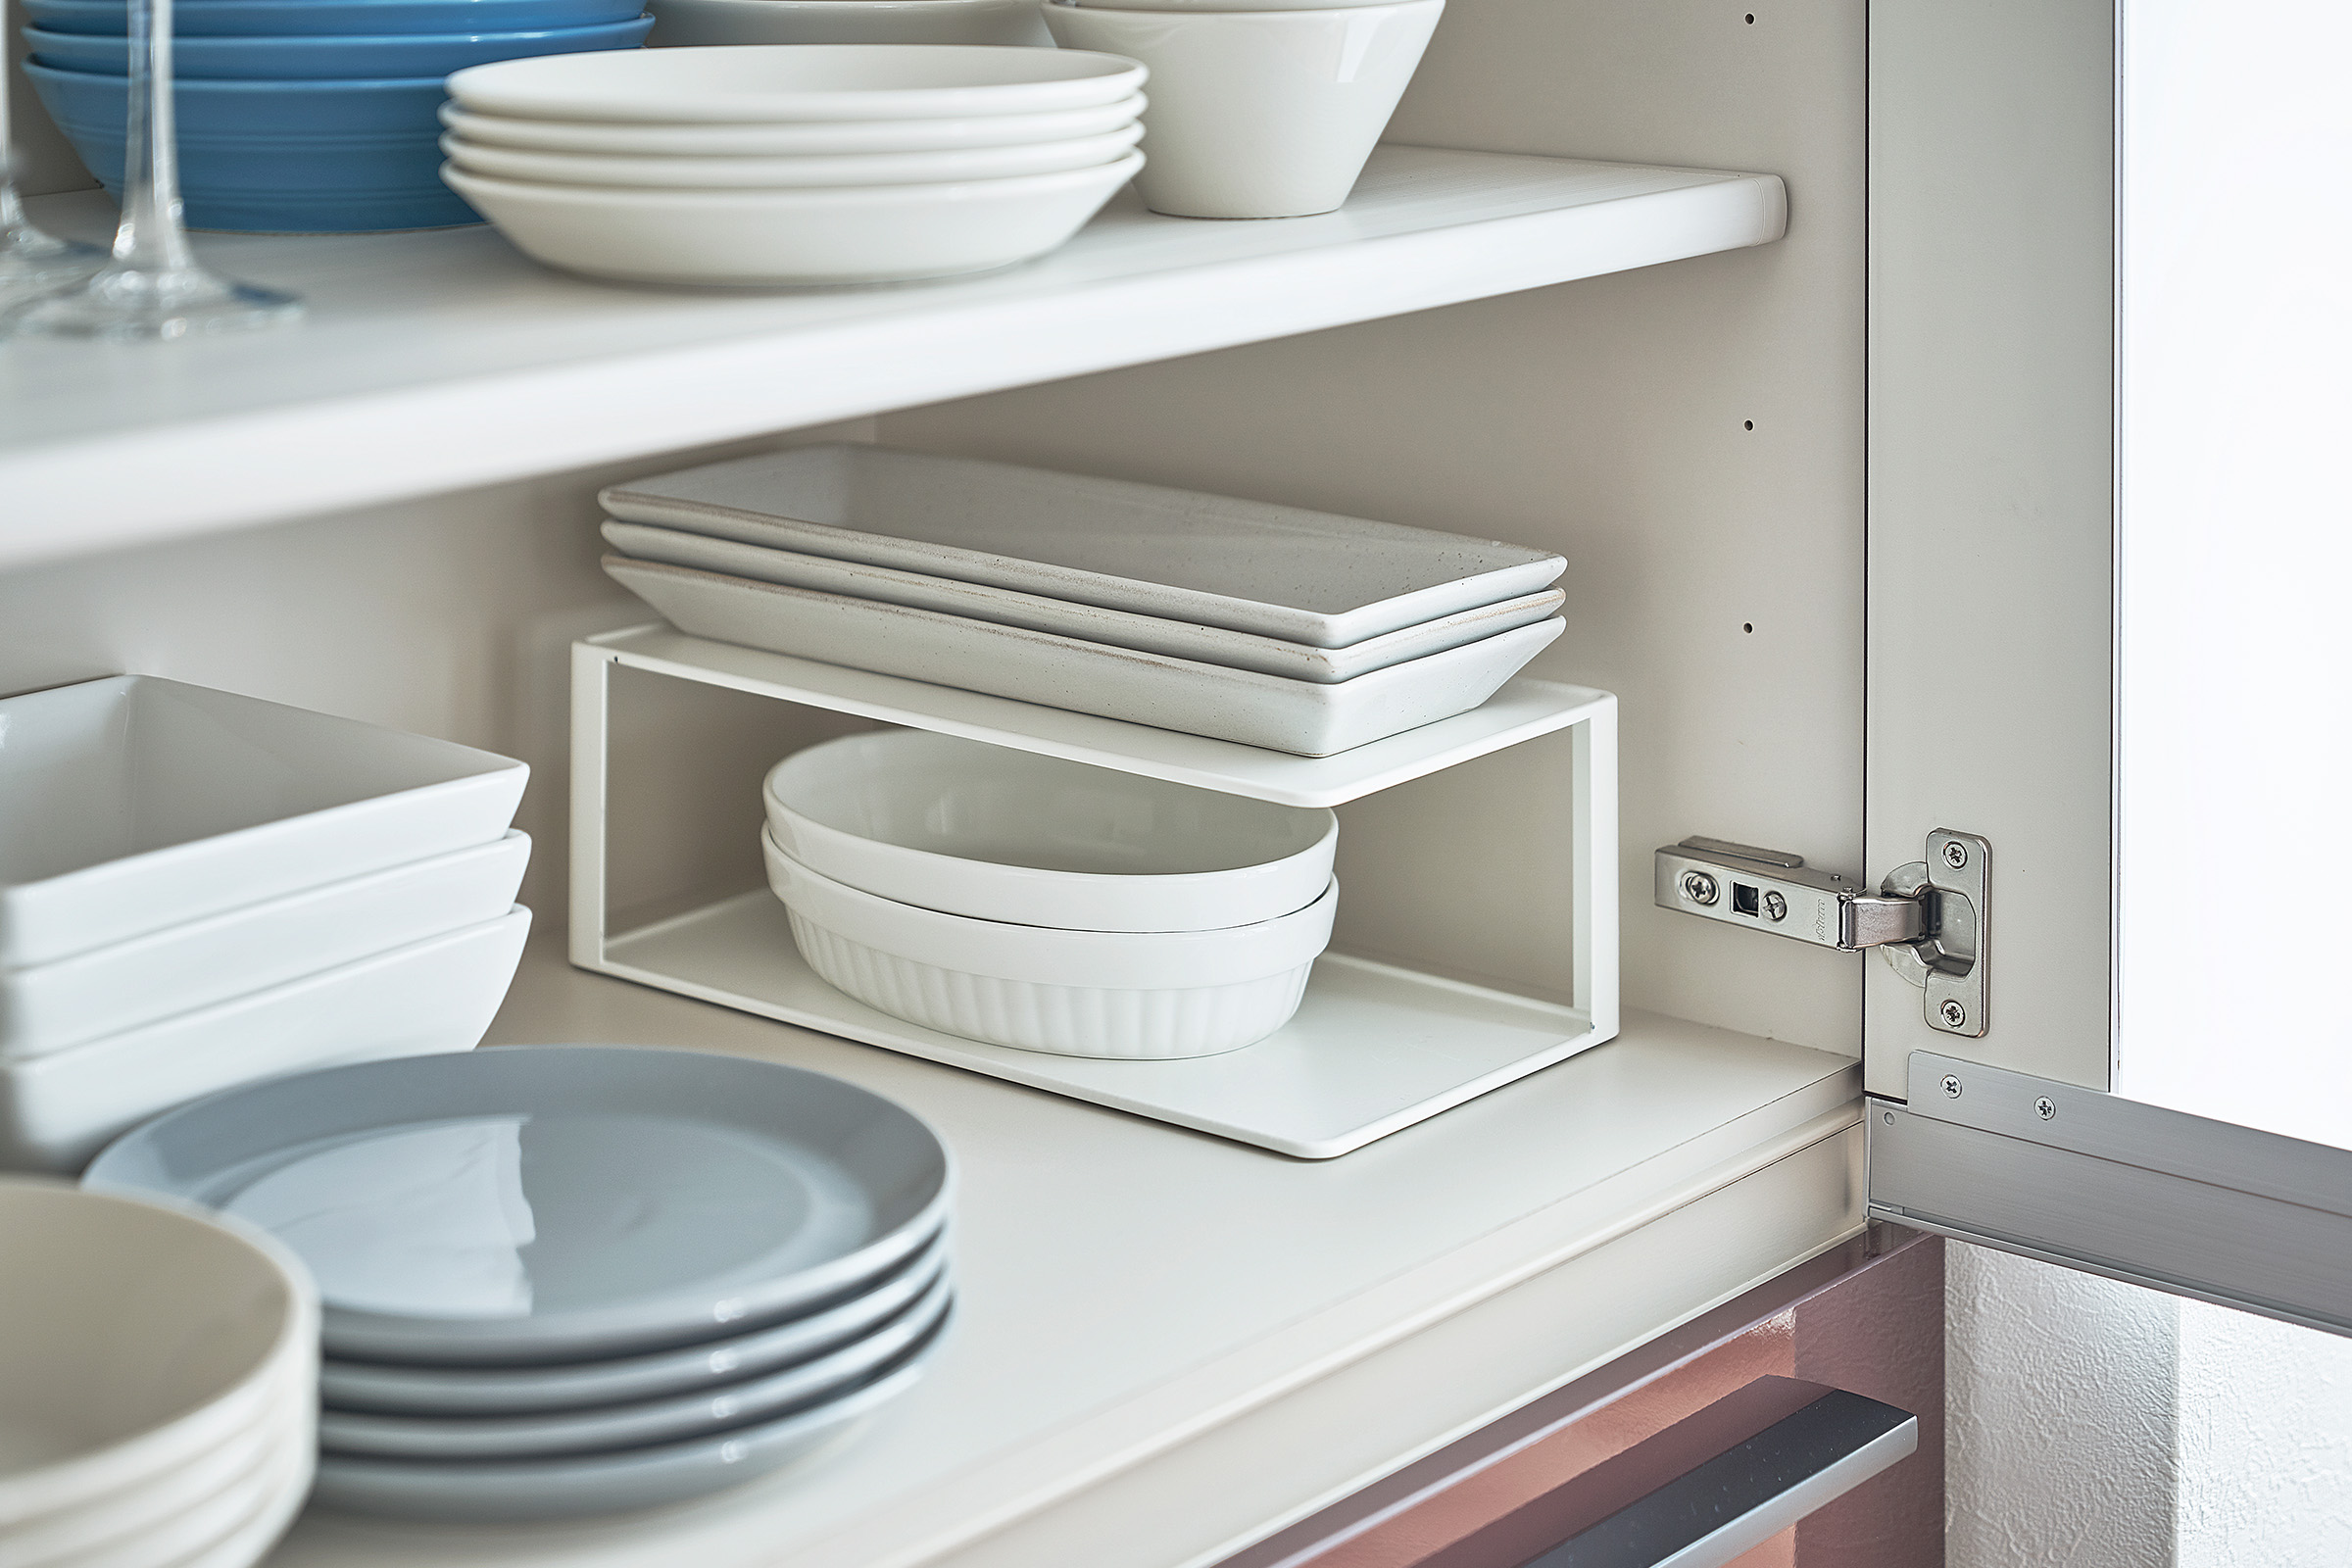 Two-Tier Cabinet Organizer by Yamazaki Home in white in a cabinet holding stacks of small plates.